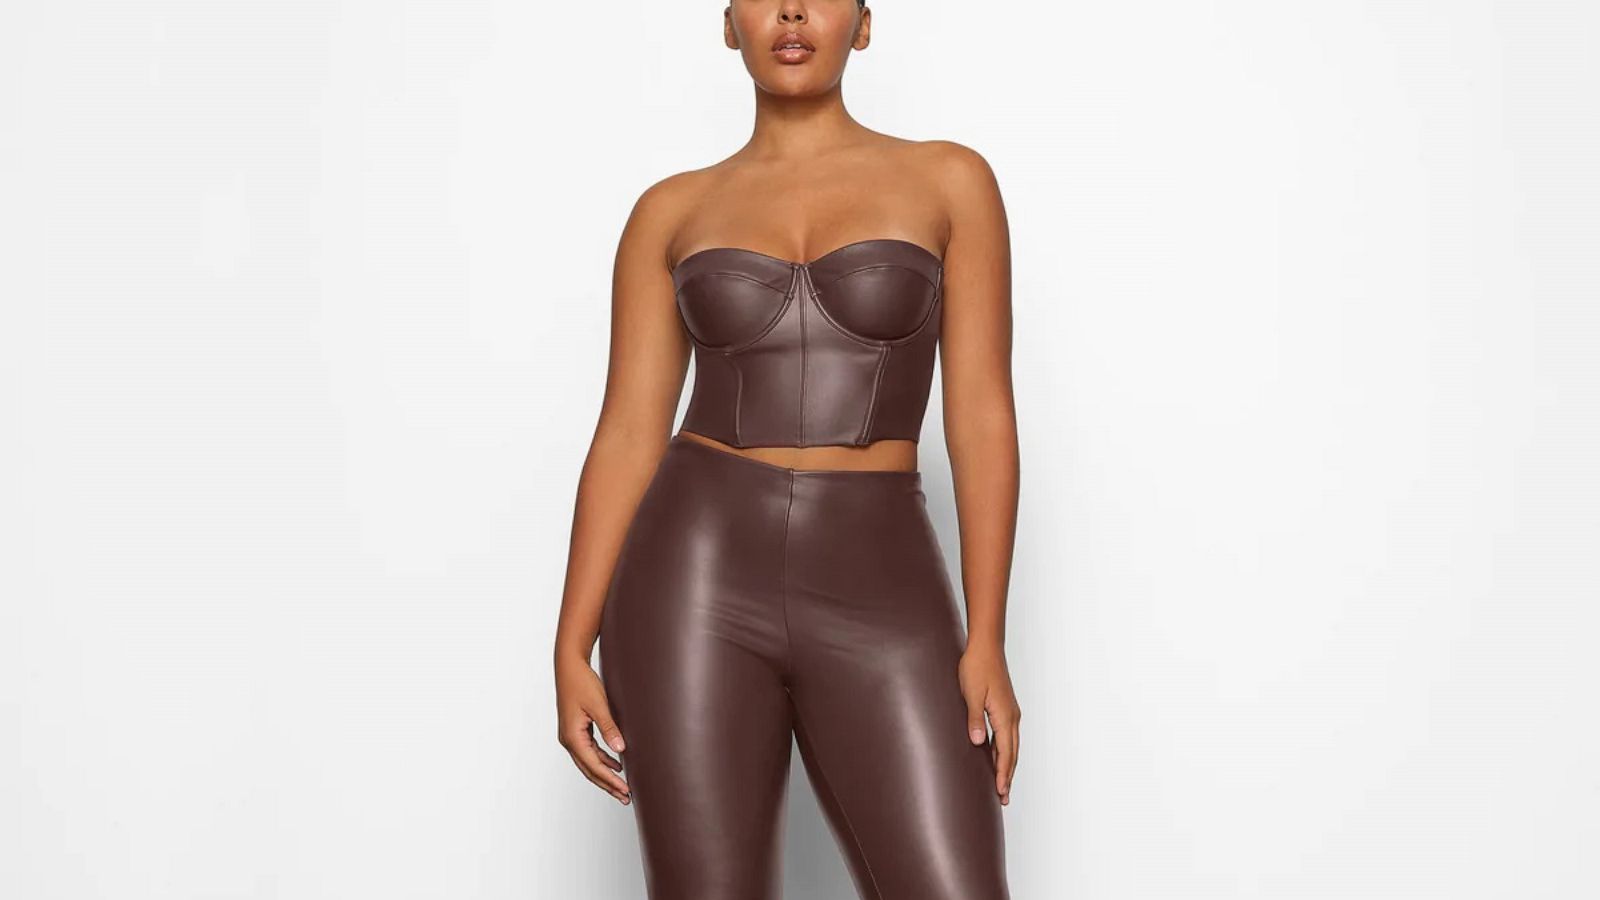 Kim Kardashian's Skims drops faux leather collection featuring